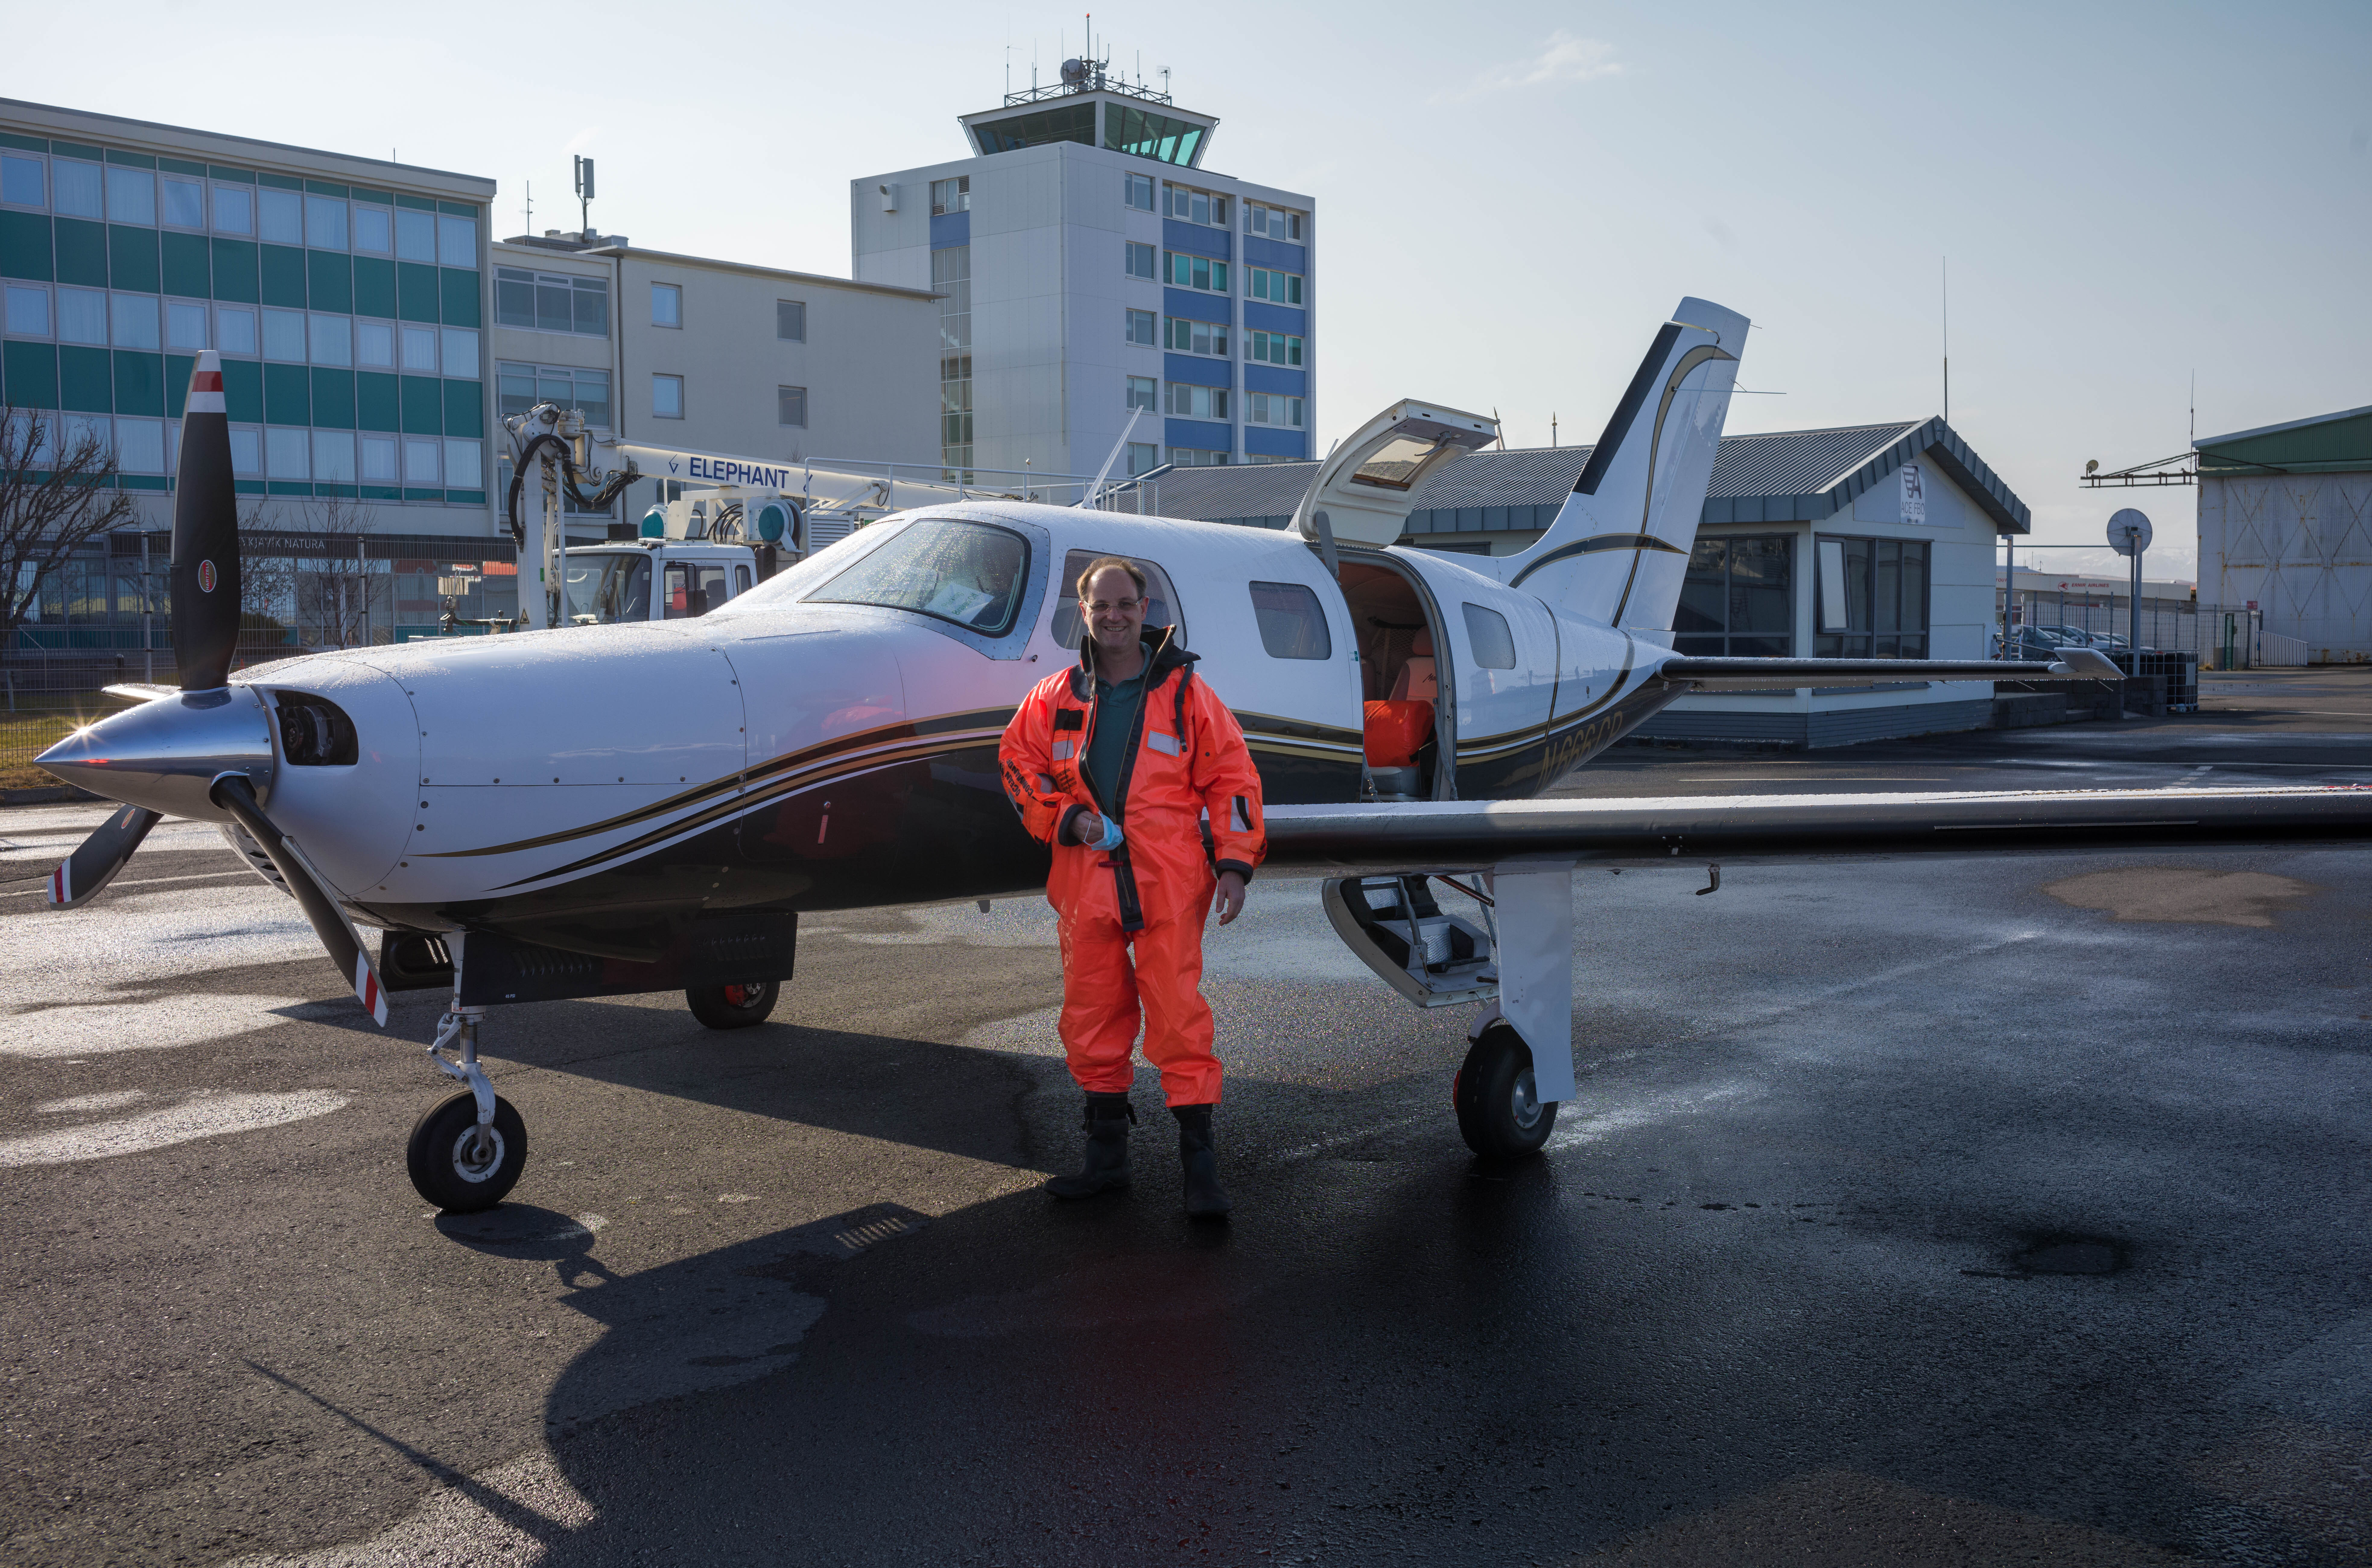 Dr. Stefan Hild making a stop in Iceland during North Atlantic crossing in his Piper Malibu in May 2021